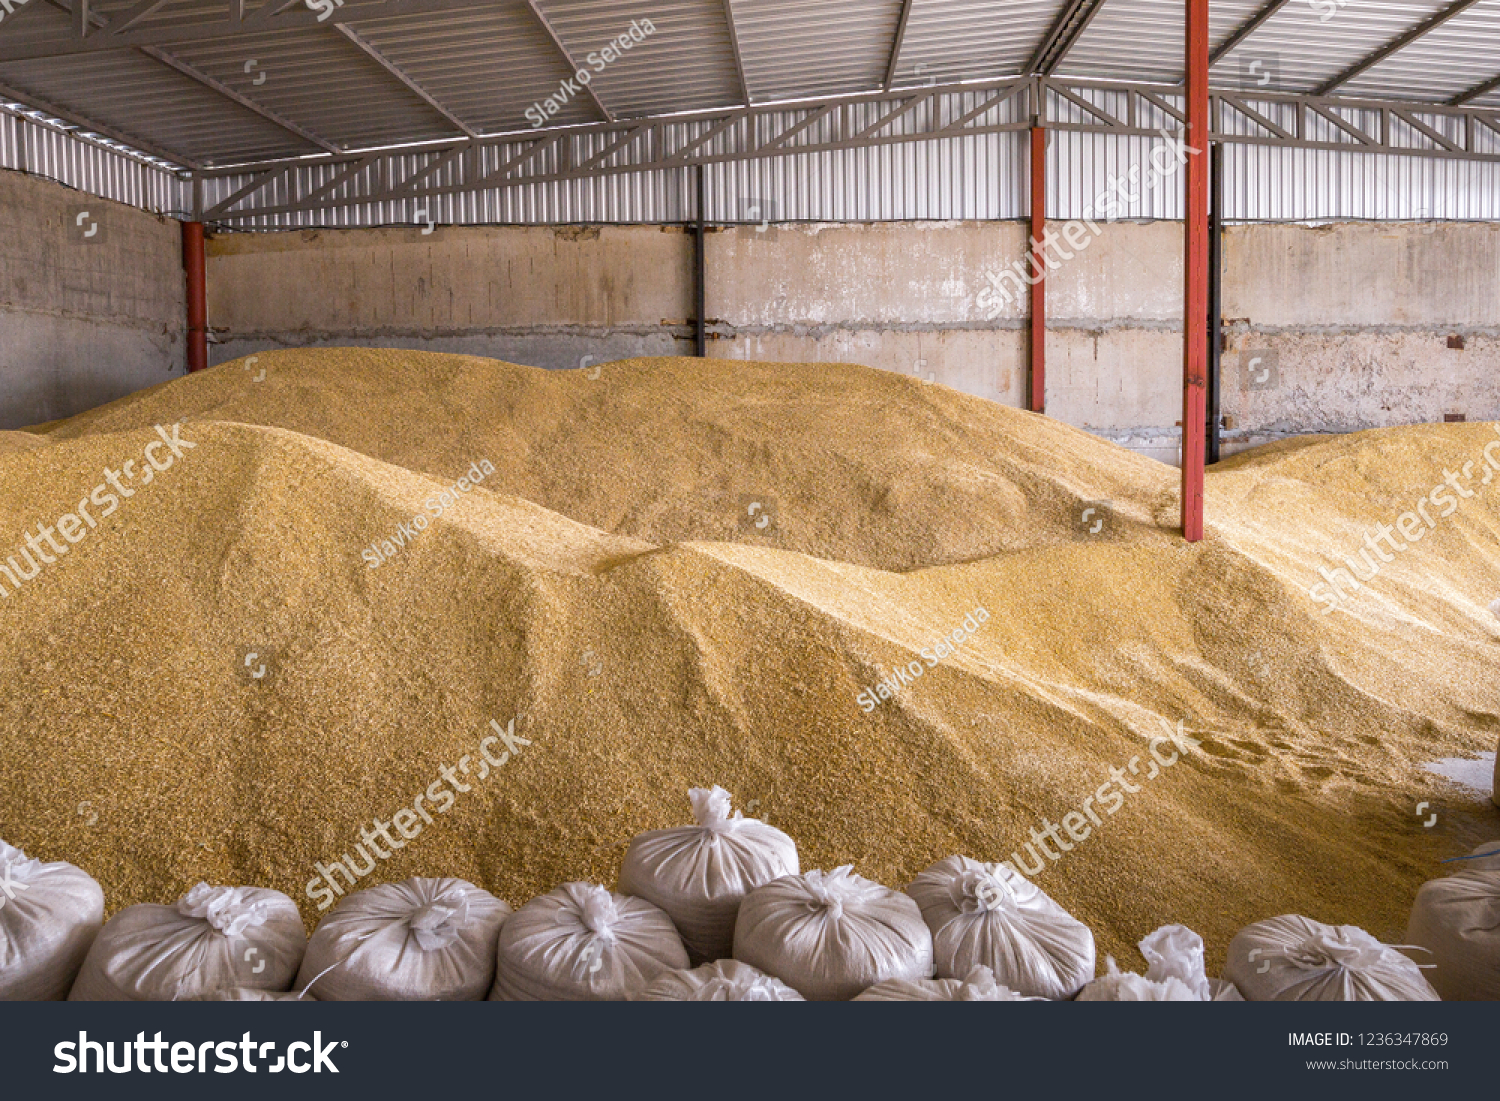 Pile of heaps of wheat grains and sacks at mill storage or grain elevator. #1236347869